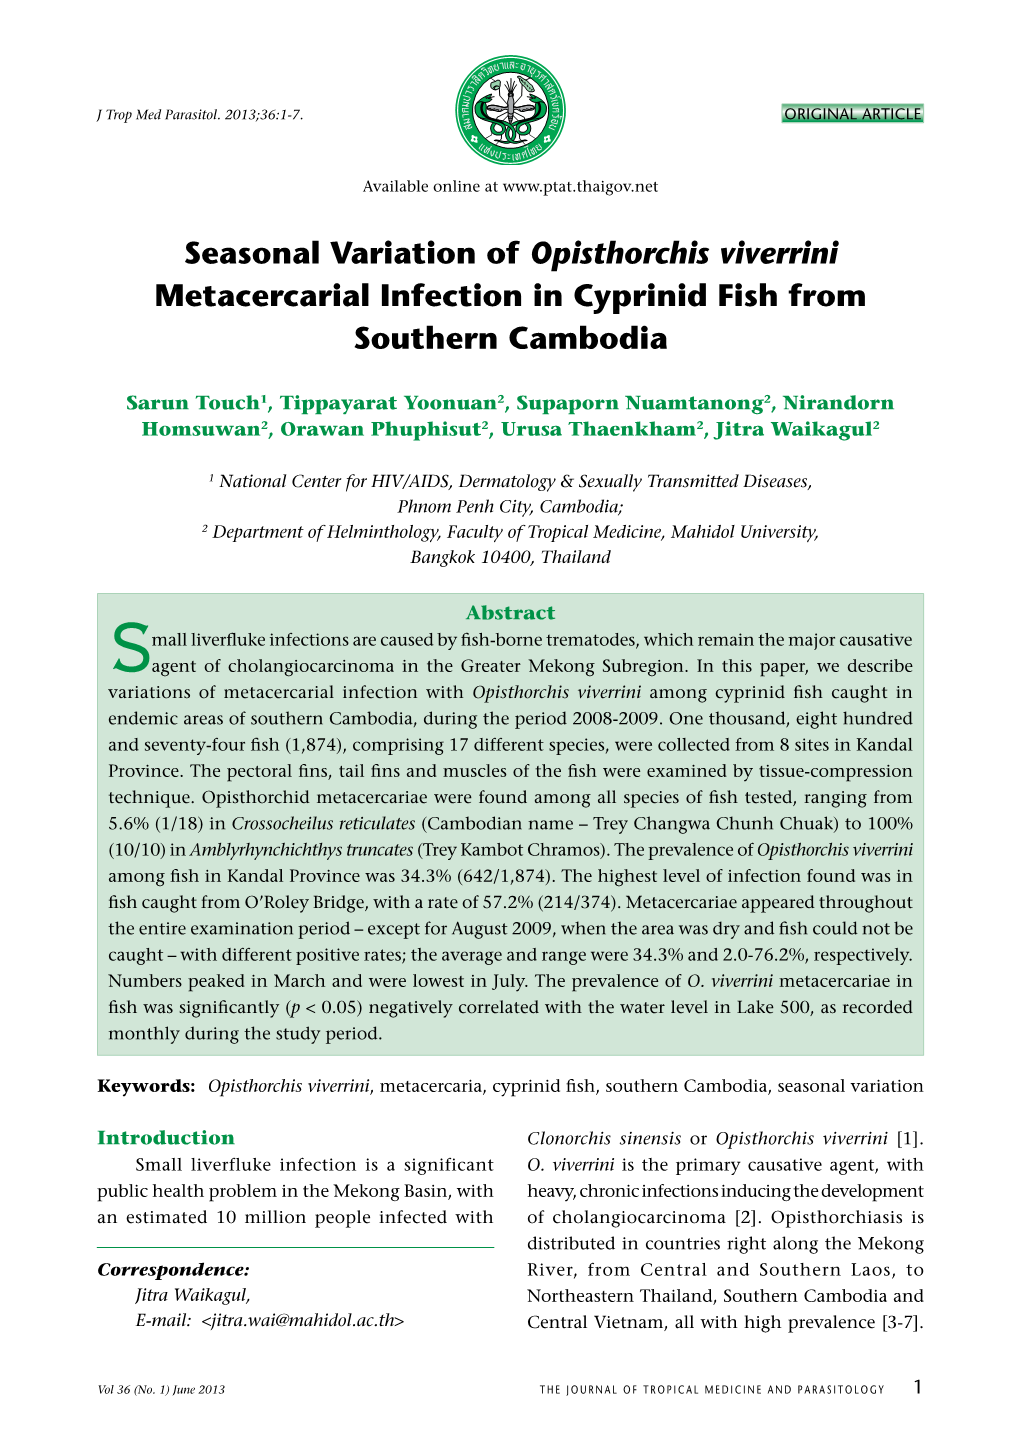 Seasonal Variation of Opisthorchis Viverrini Metacercarial Infection in Cyprinid Fish from Southern Cambodia